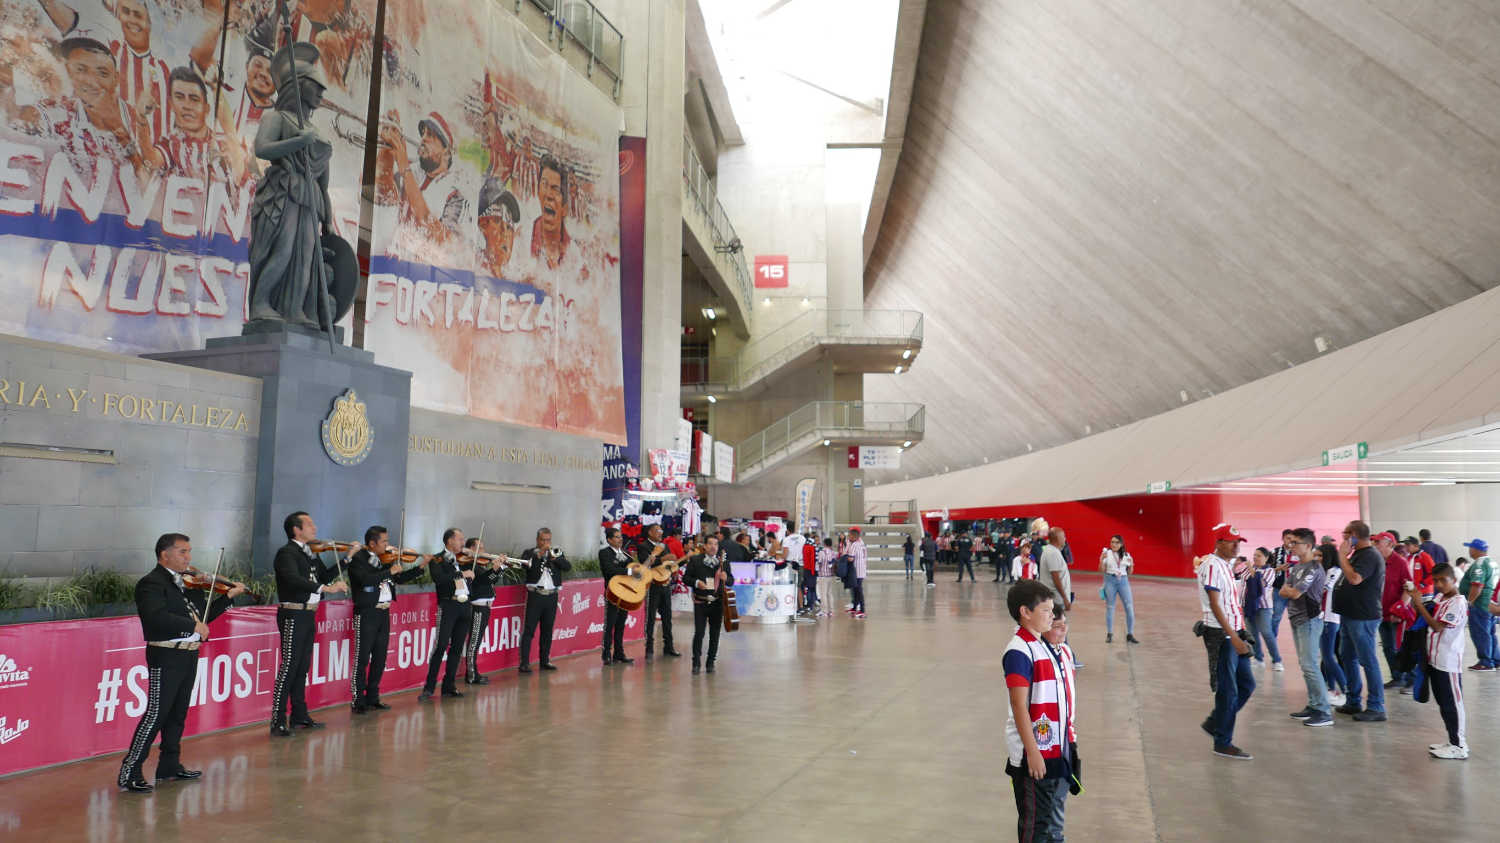 Band playing mariachi music on the concourse of Chivas stadium in Guadalajara